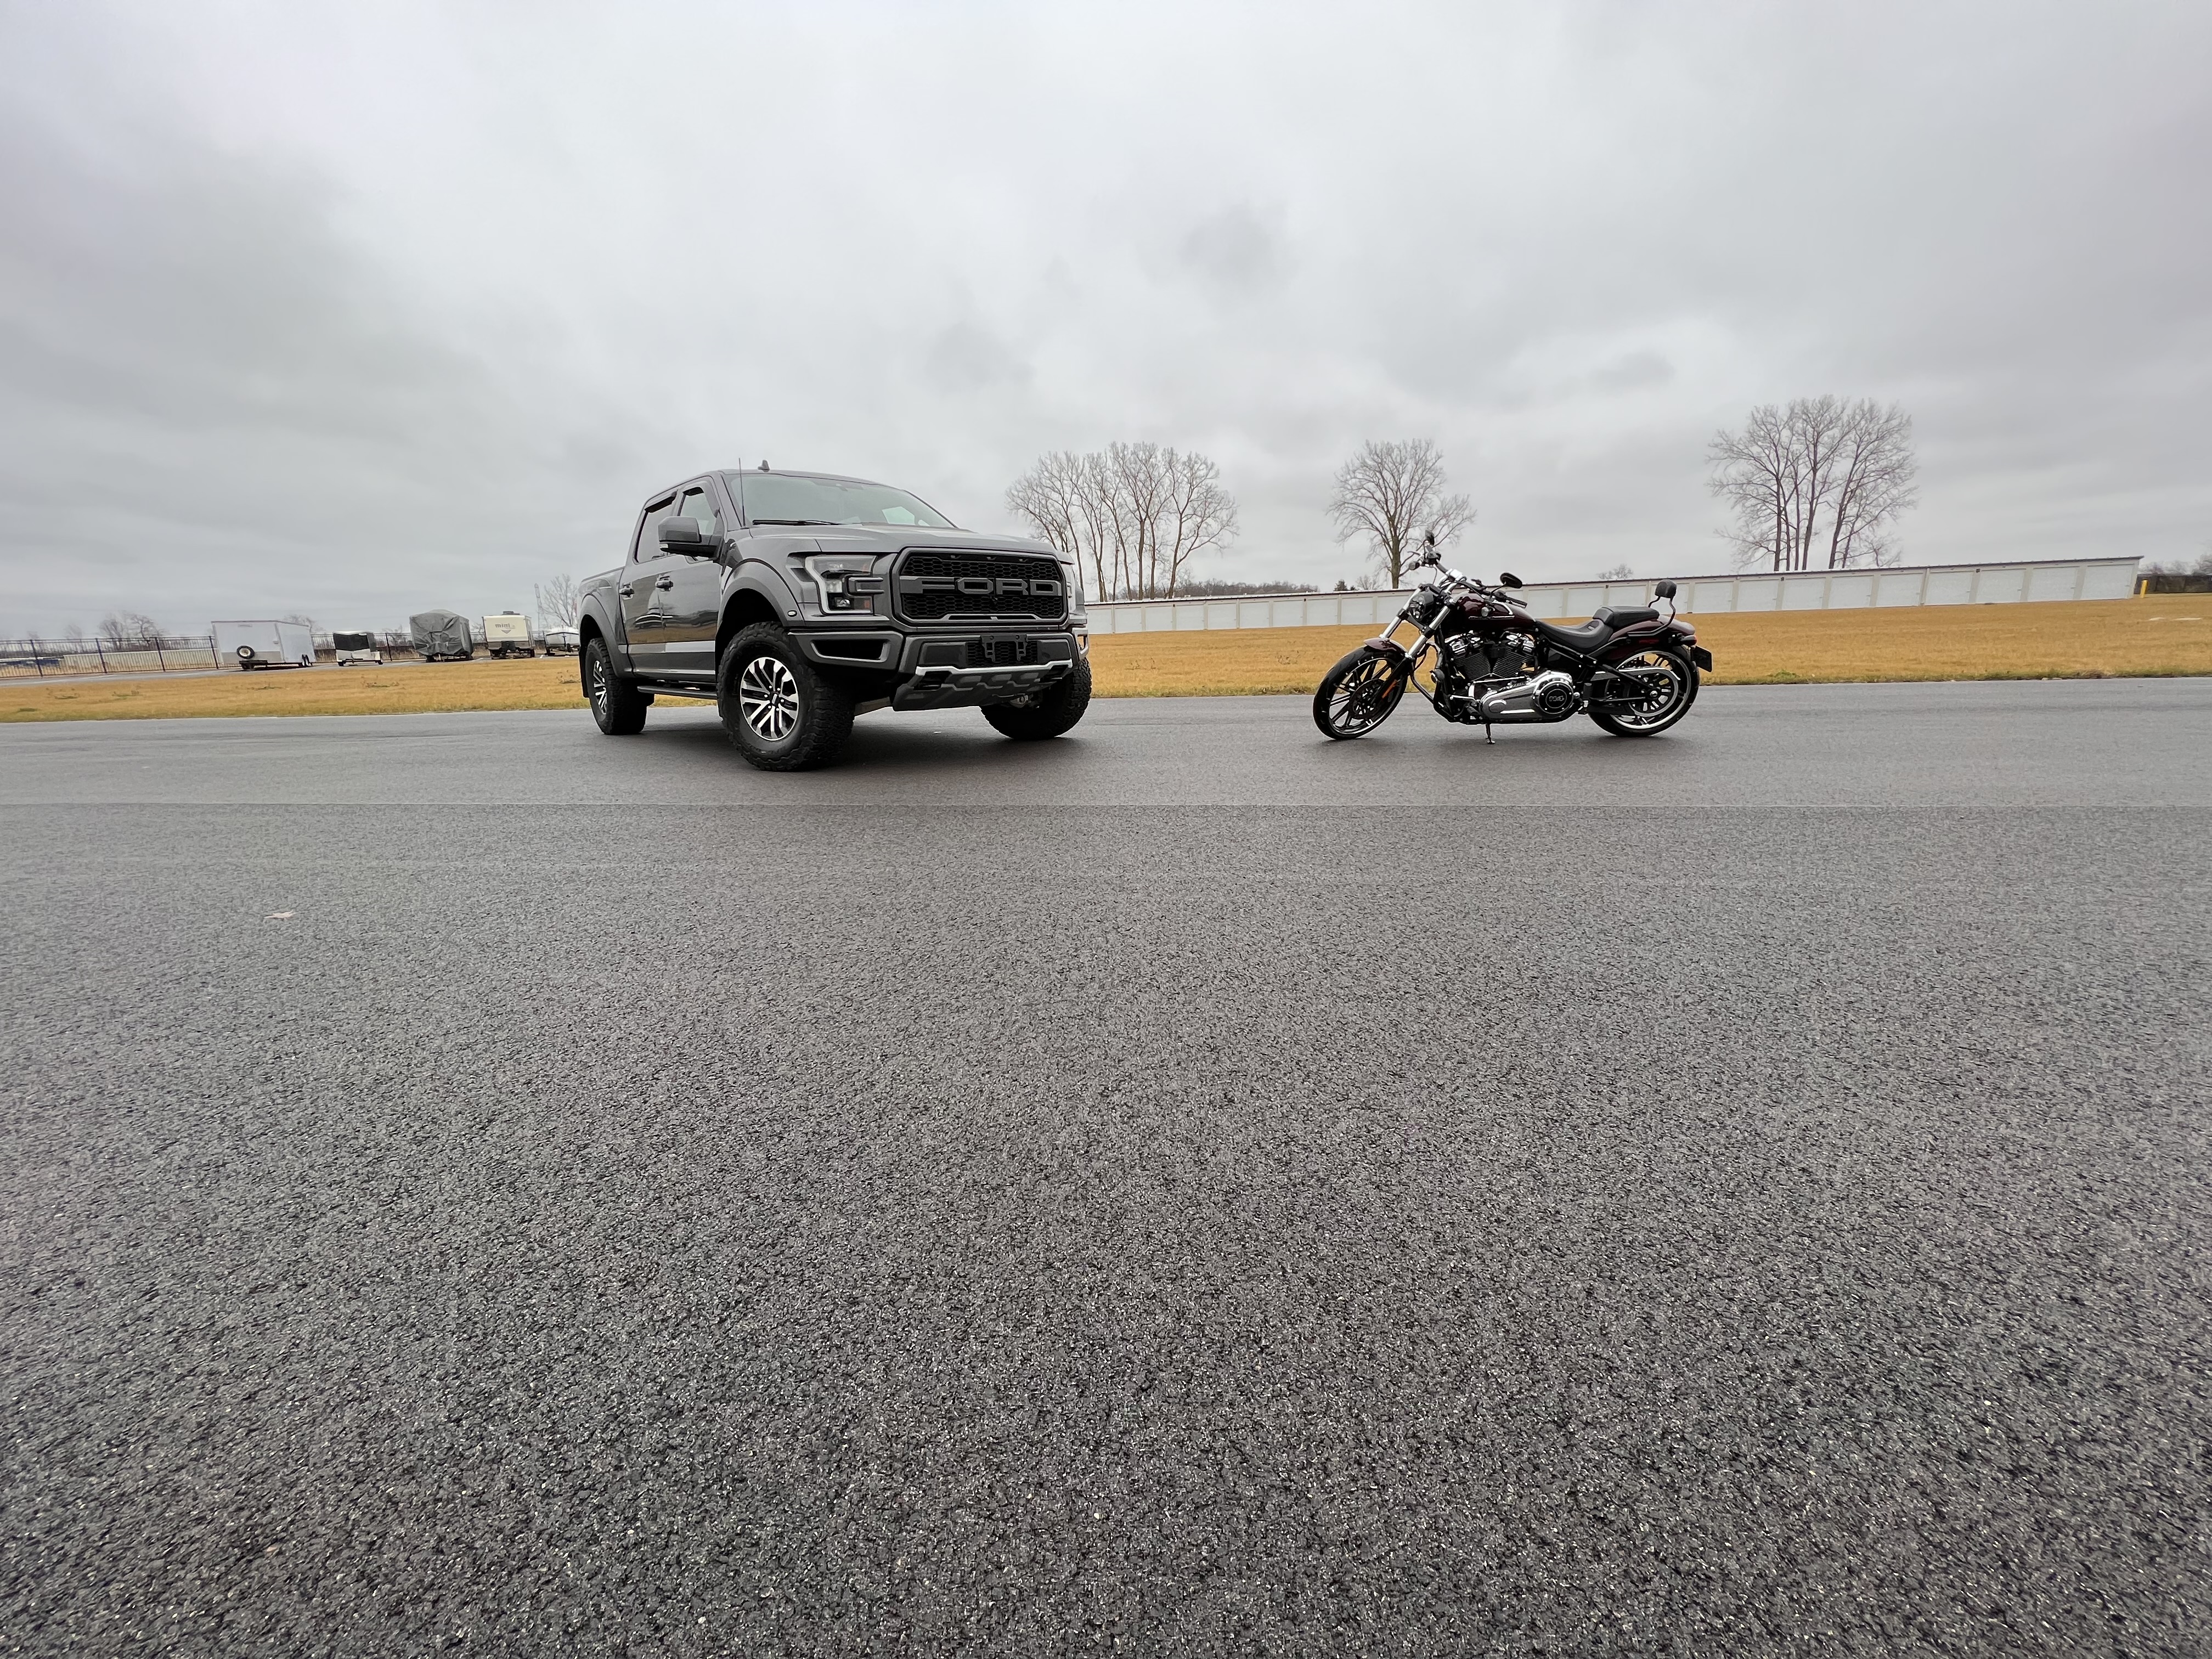 Ford Raptor and Harley Breakout